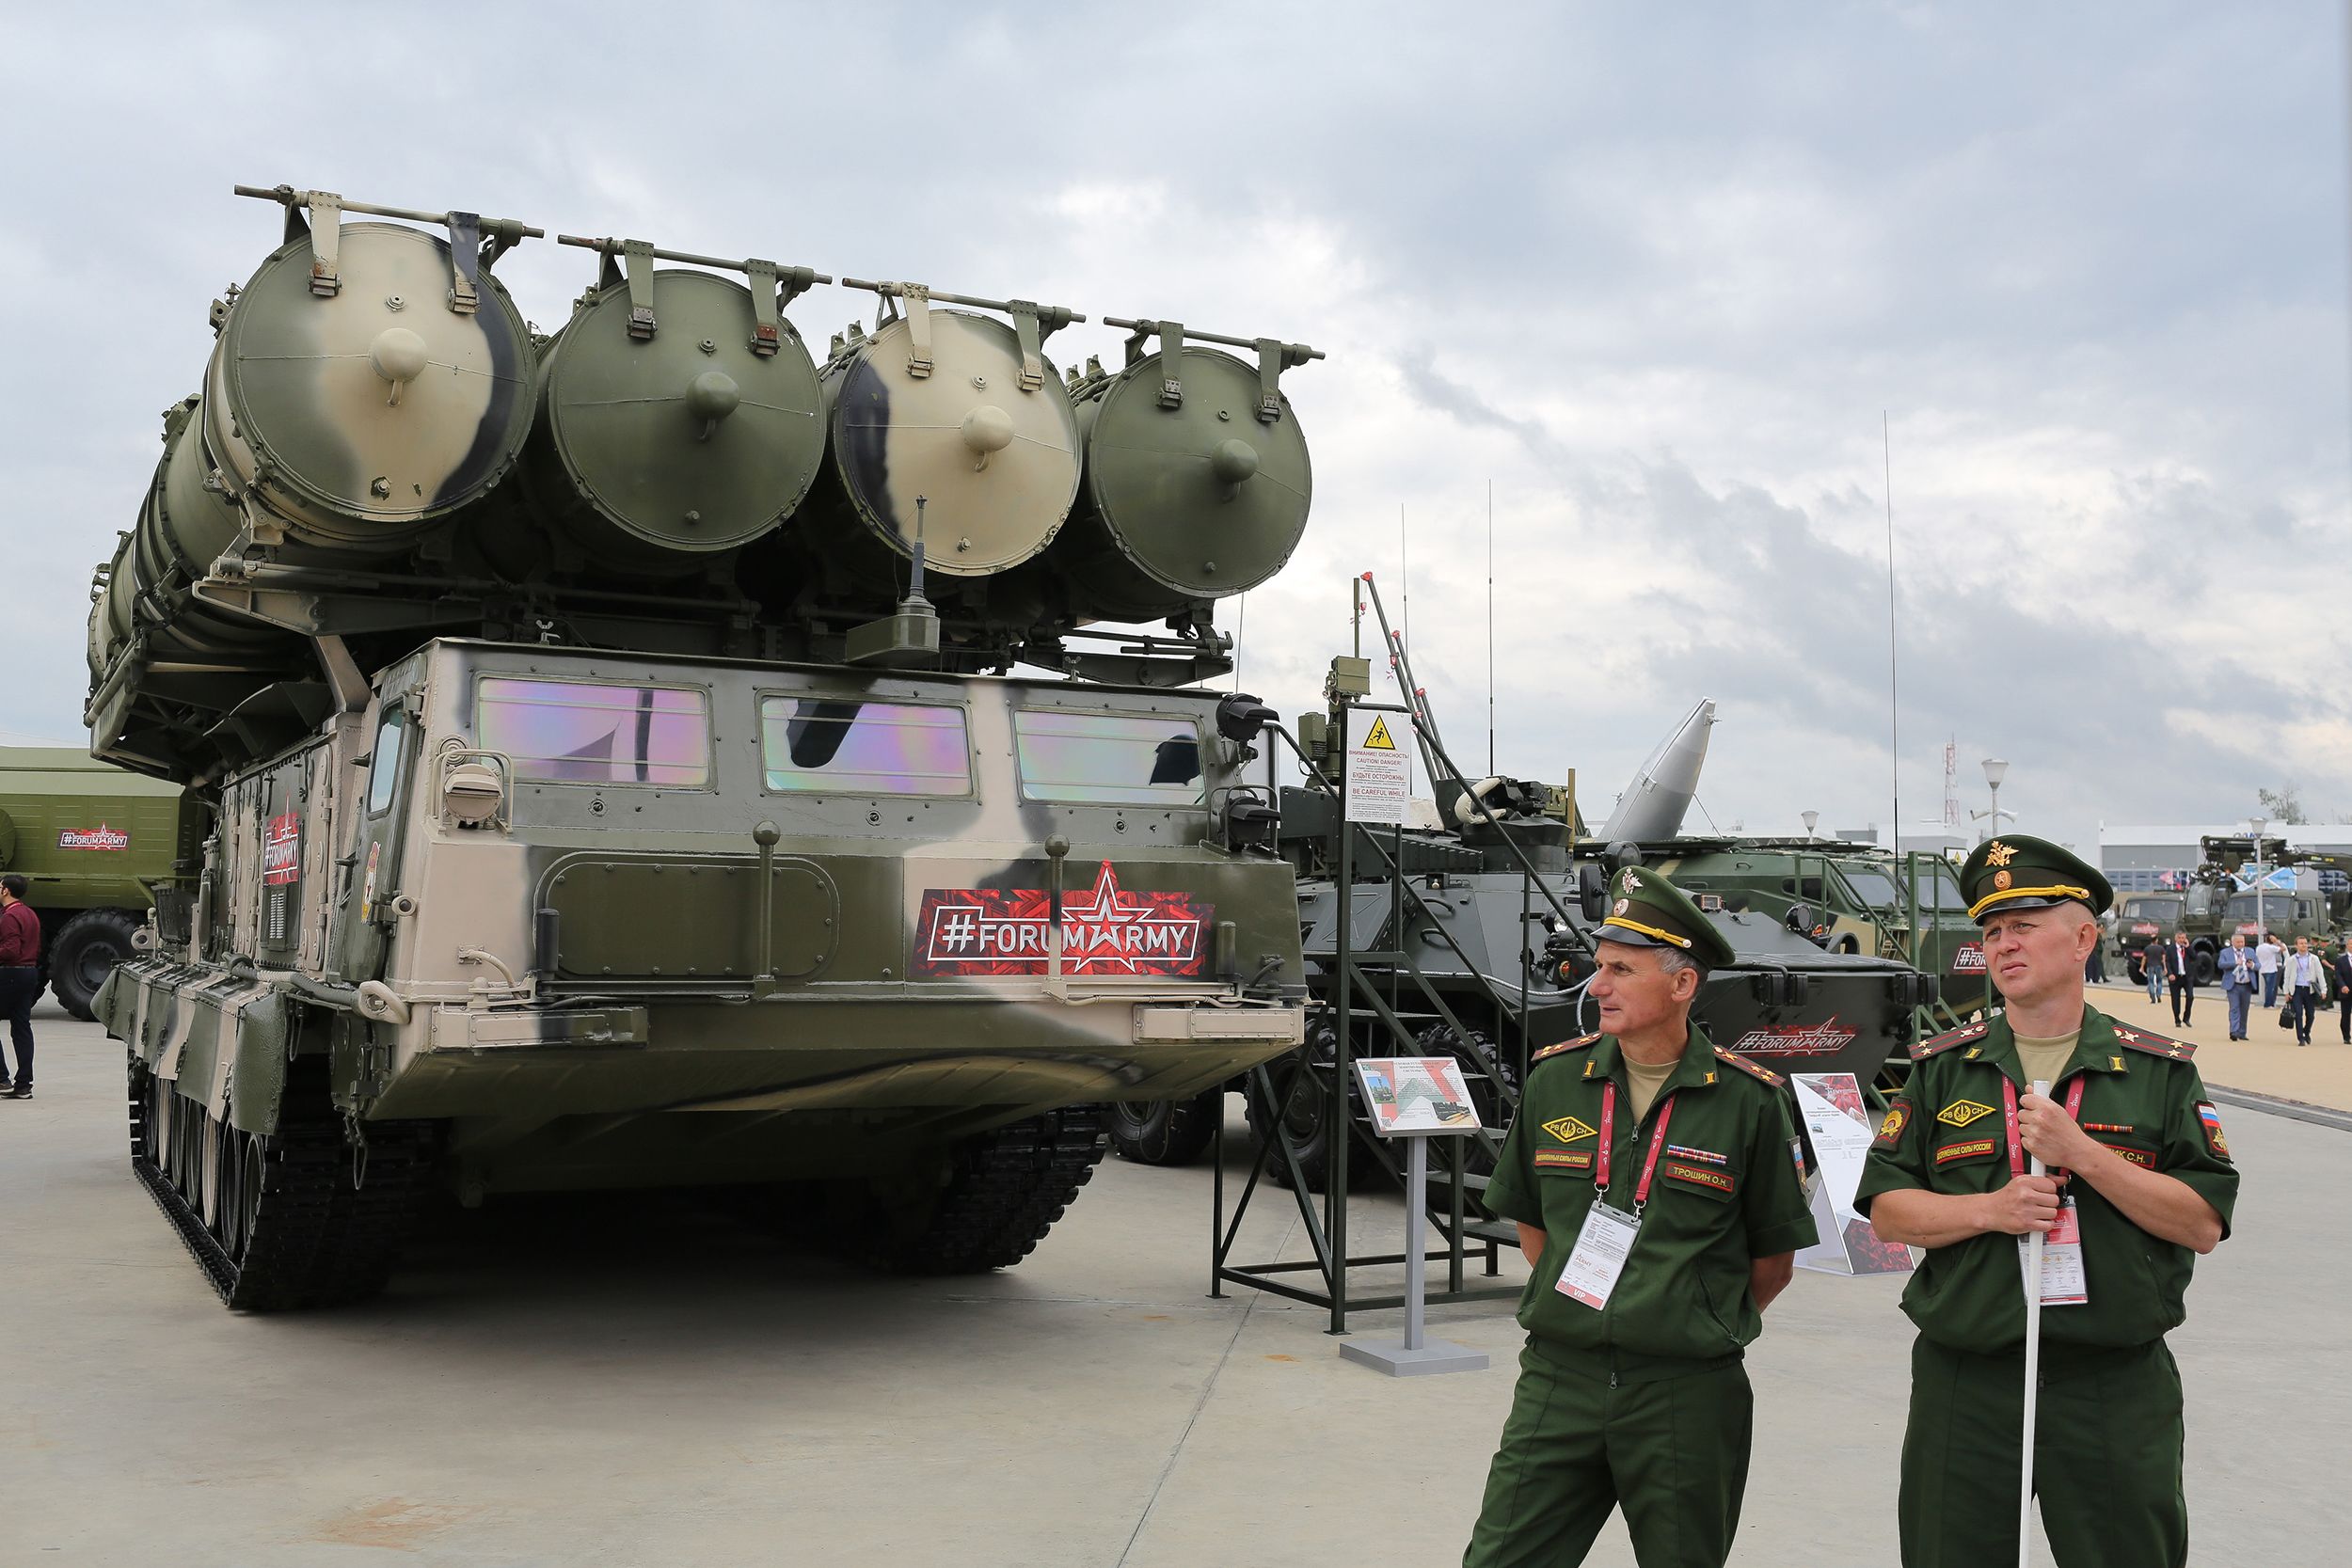 Russian S-300 Missile